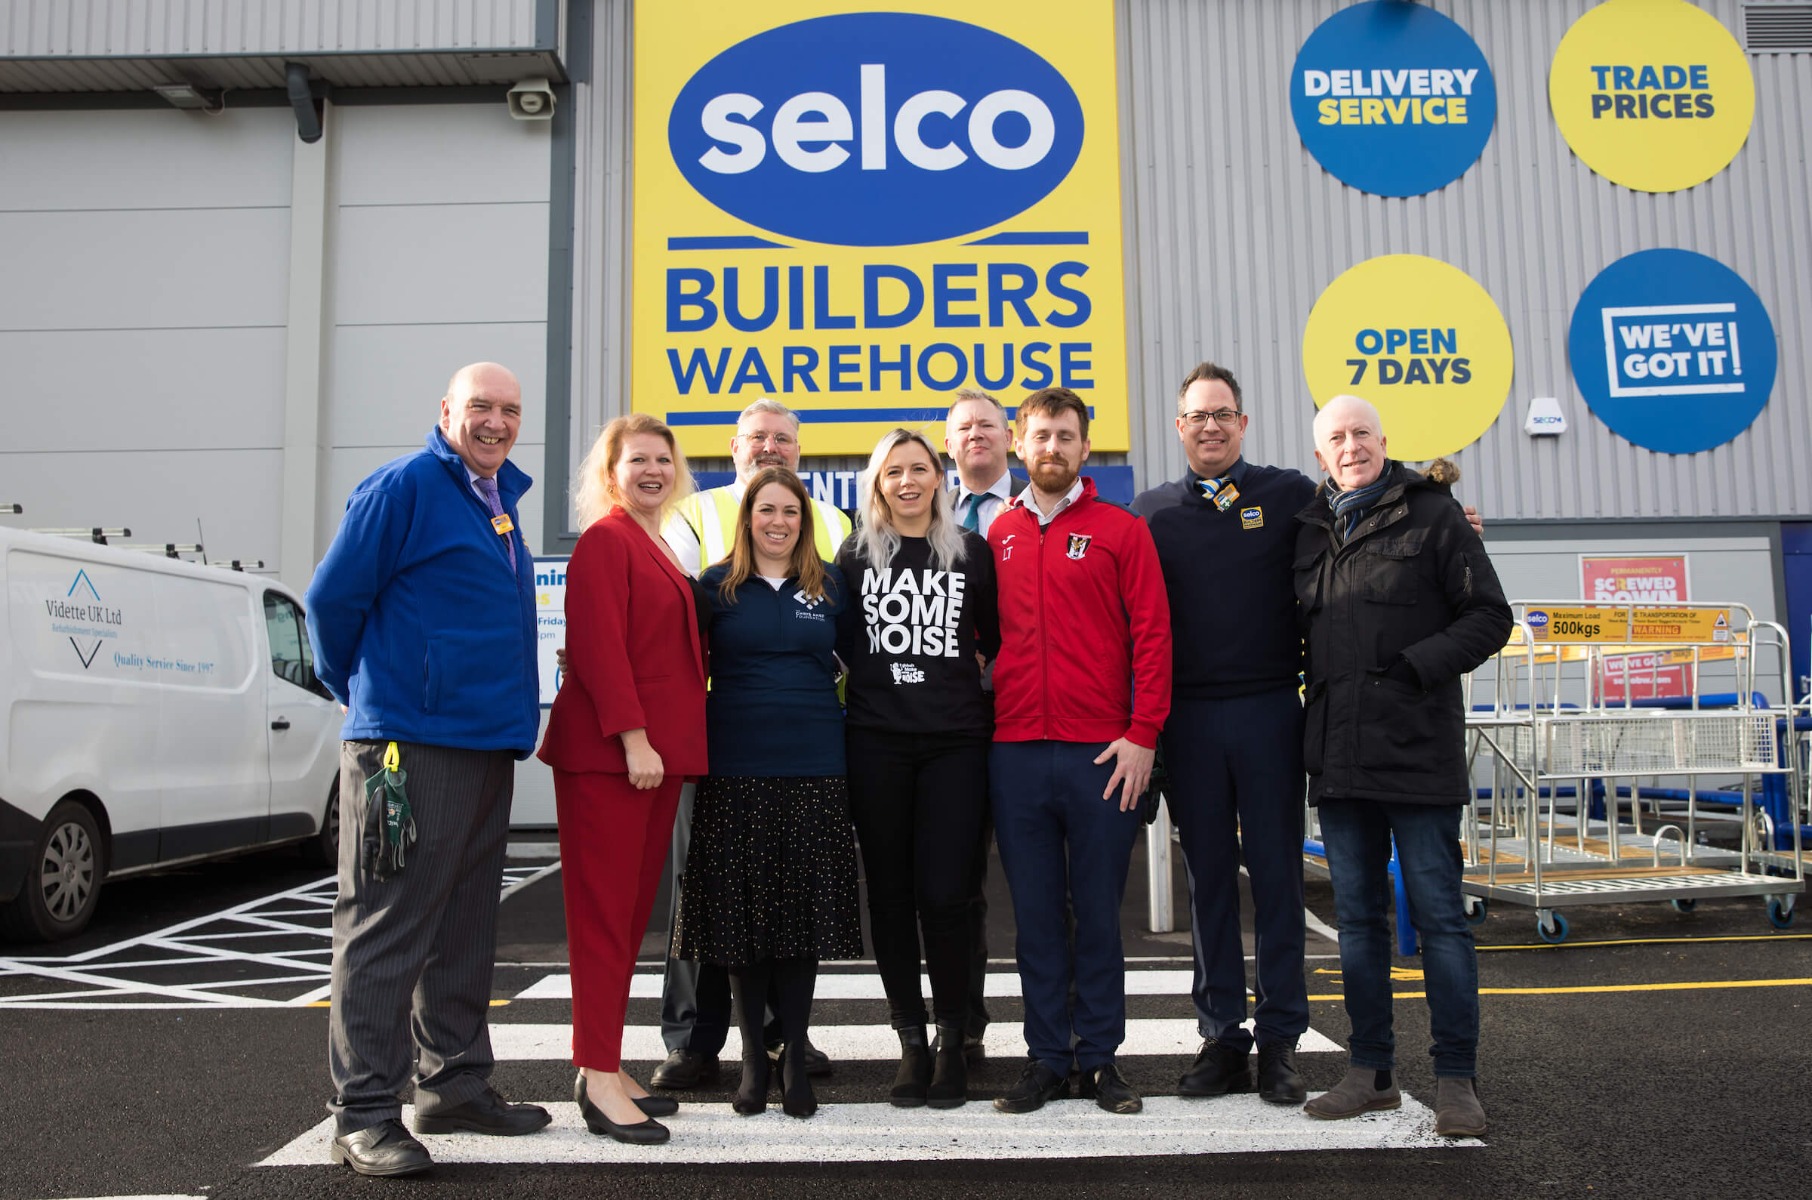 Selco has donated £100,000 to Global’s Make Some Noise